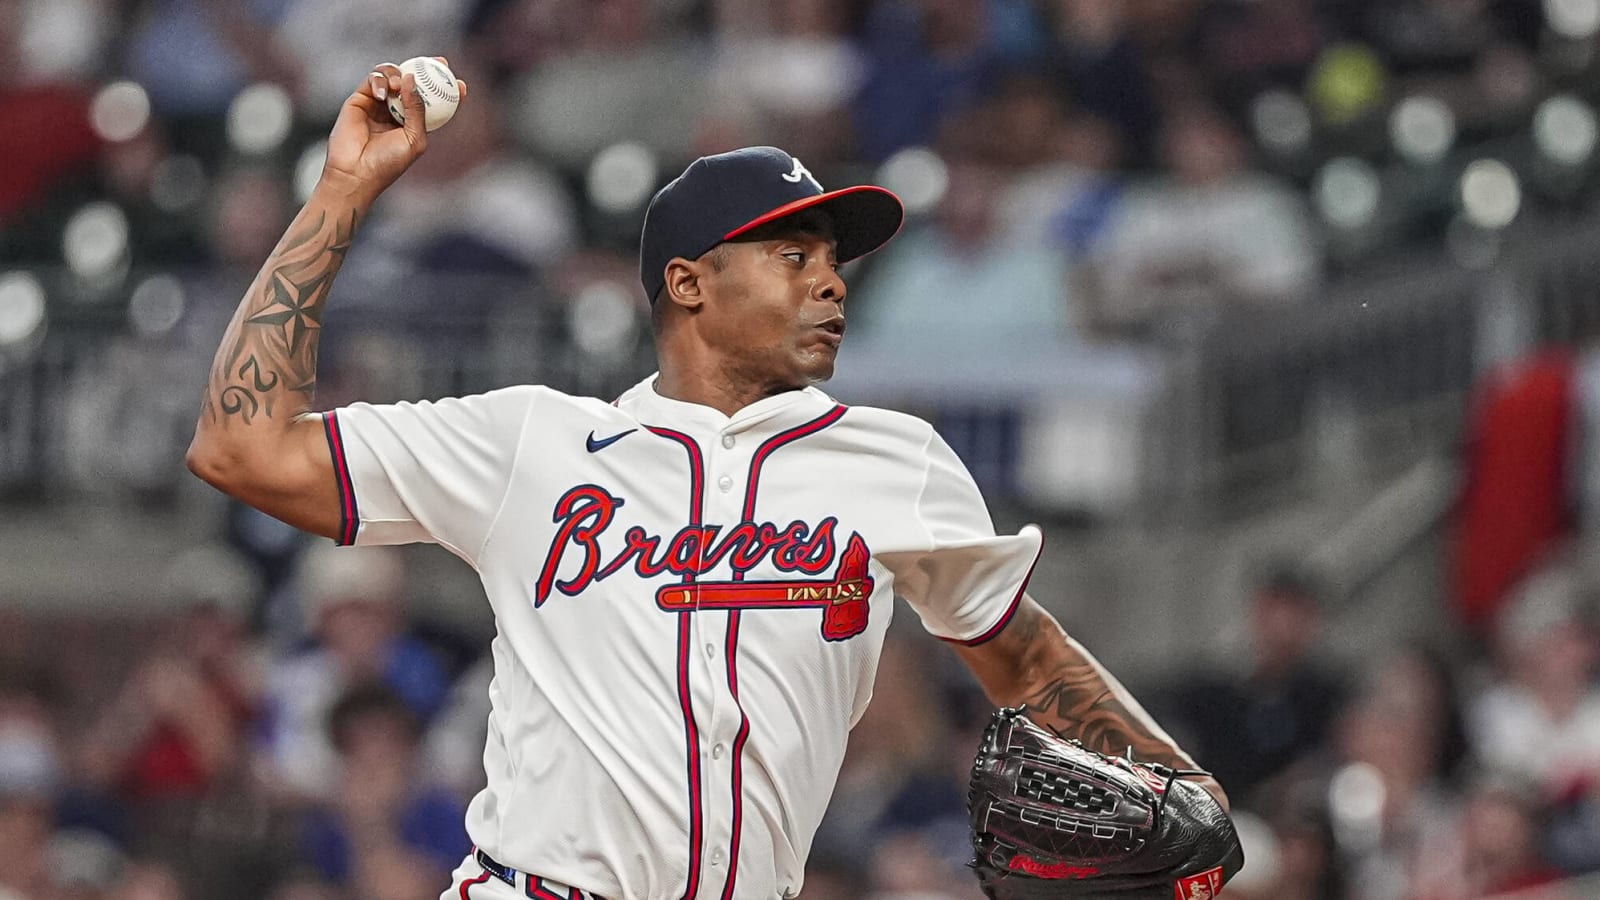 Are the Braves underperforming preseason expectations thus far?